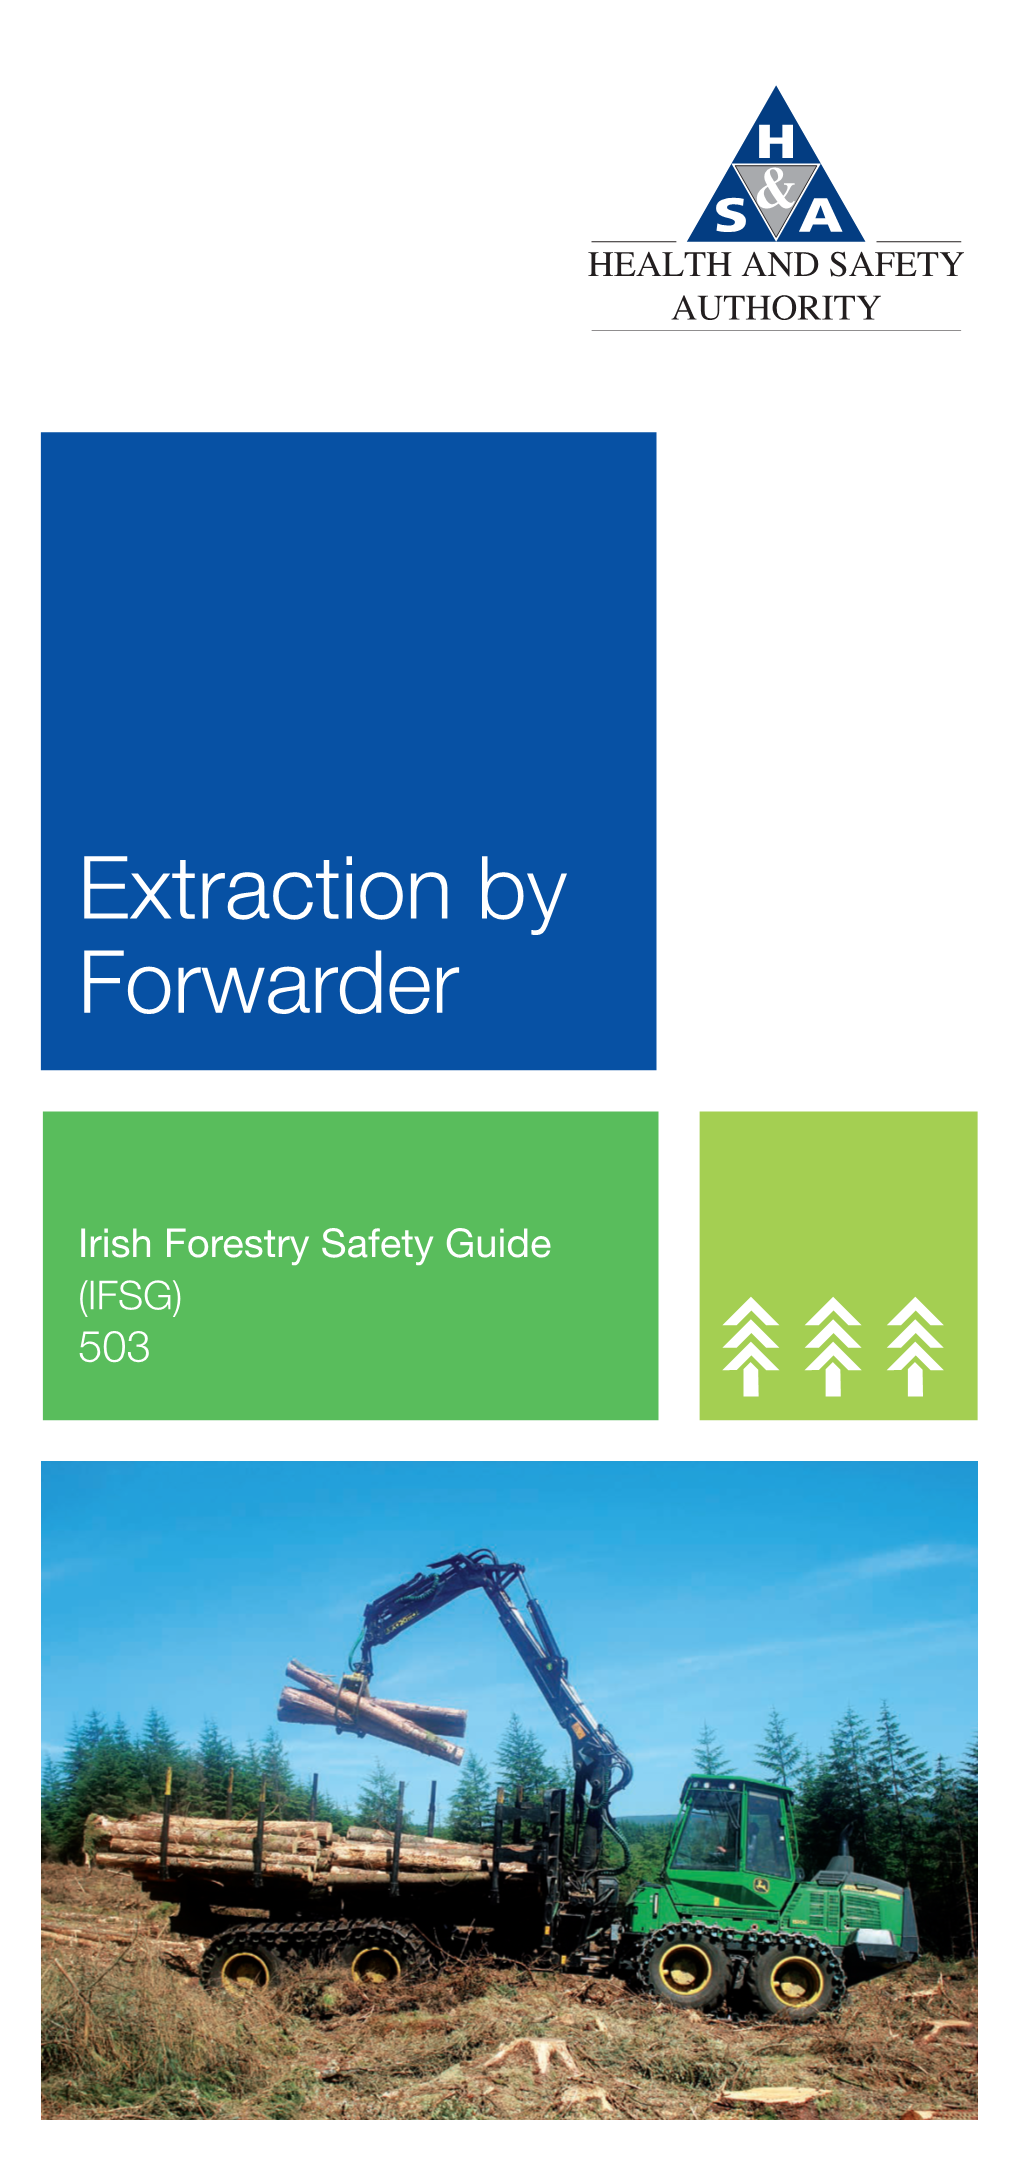 IFSG Leaflets: Precautions Must Be Put in Place Around the Stack